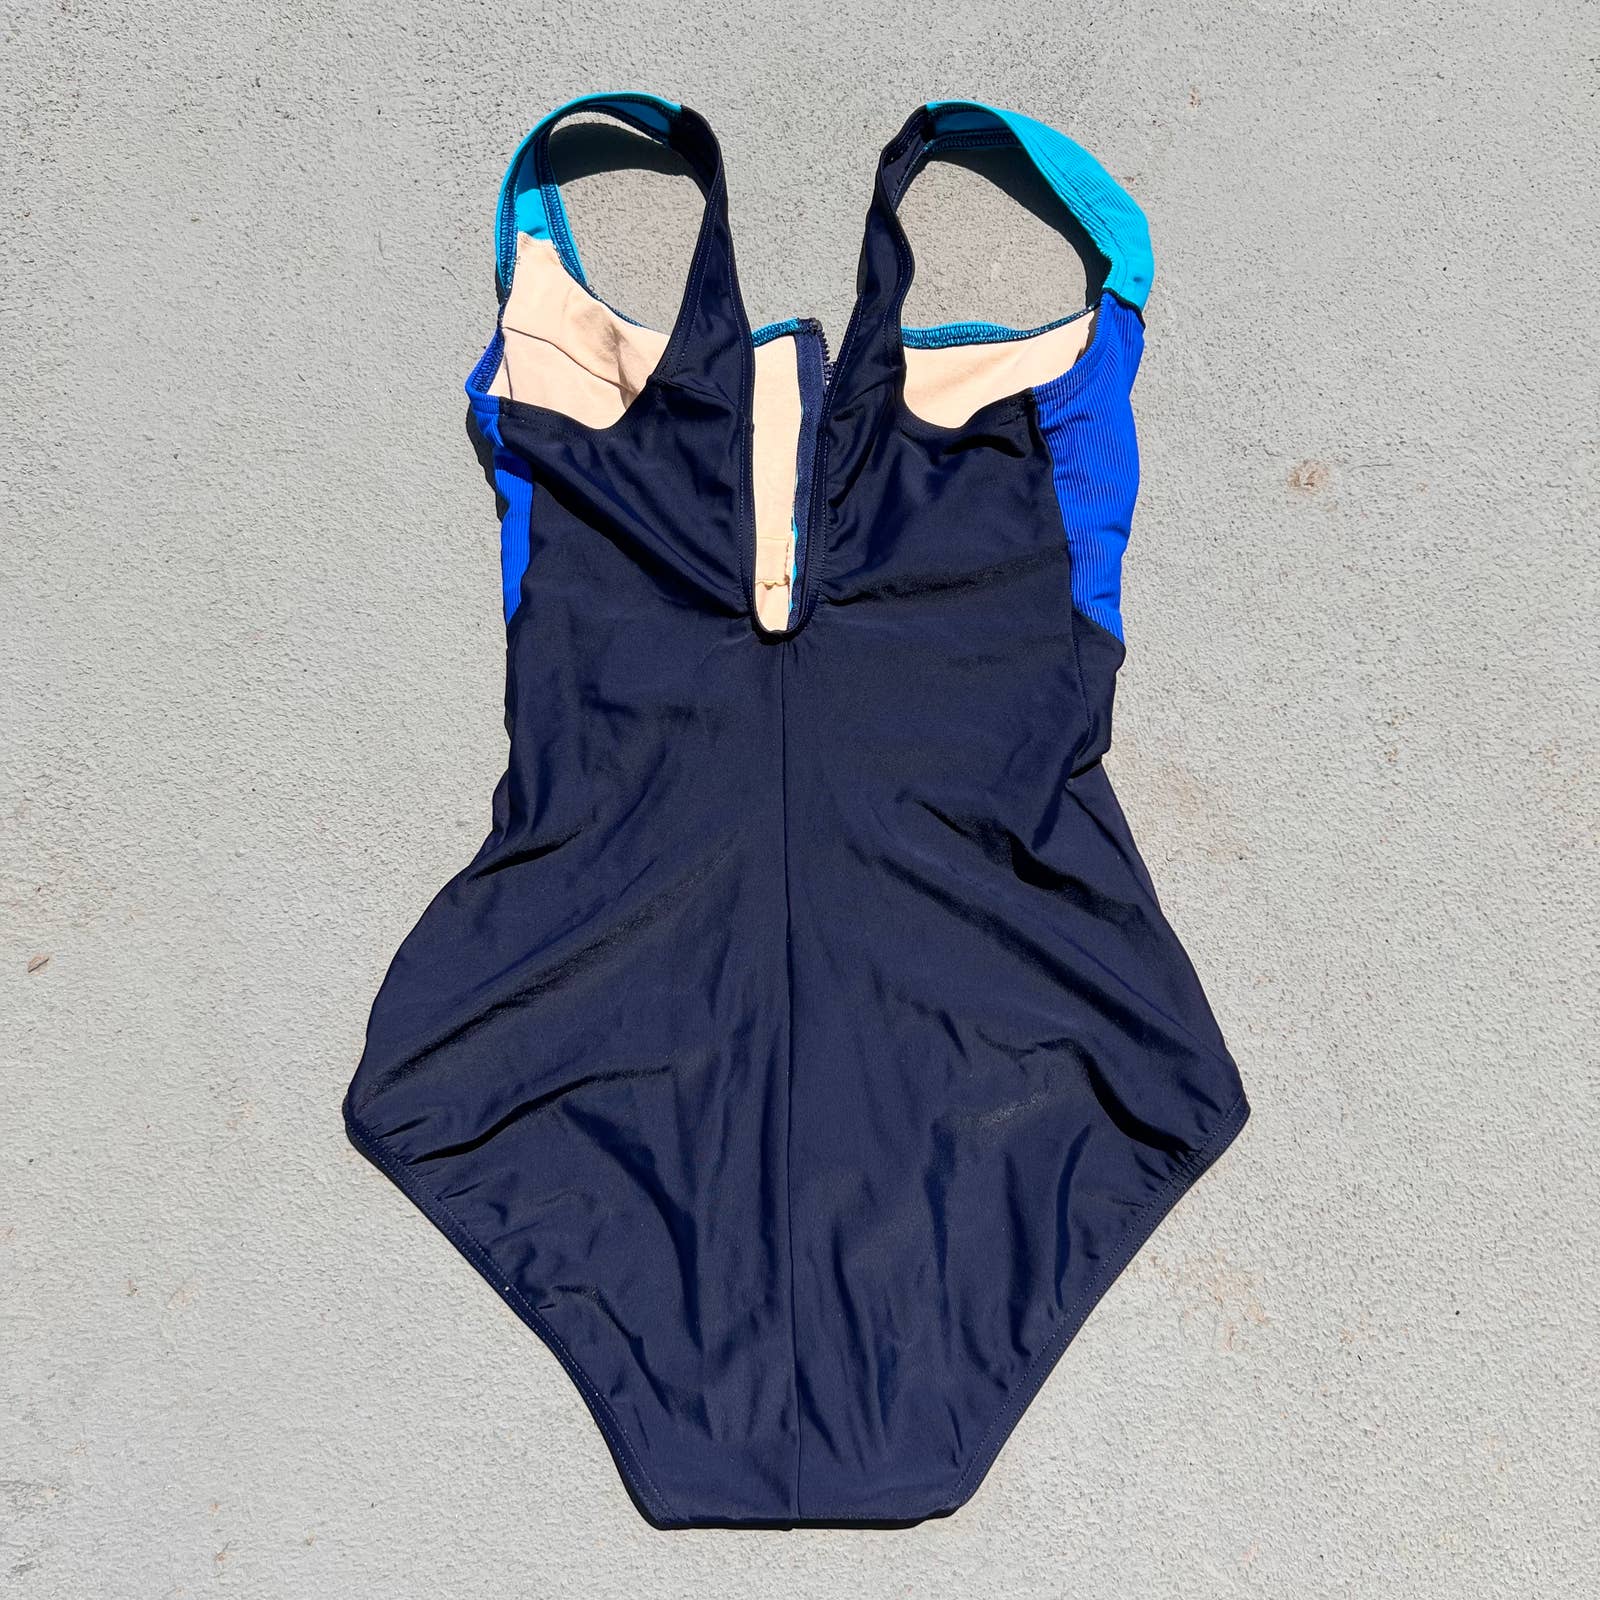 Vintage 90s Zipper Front Colorblock One Piece Swimsuit by Christina ...